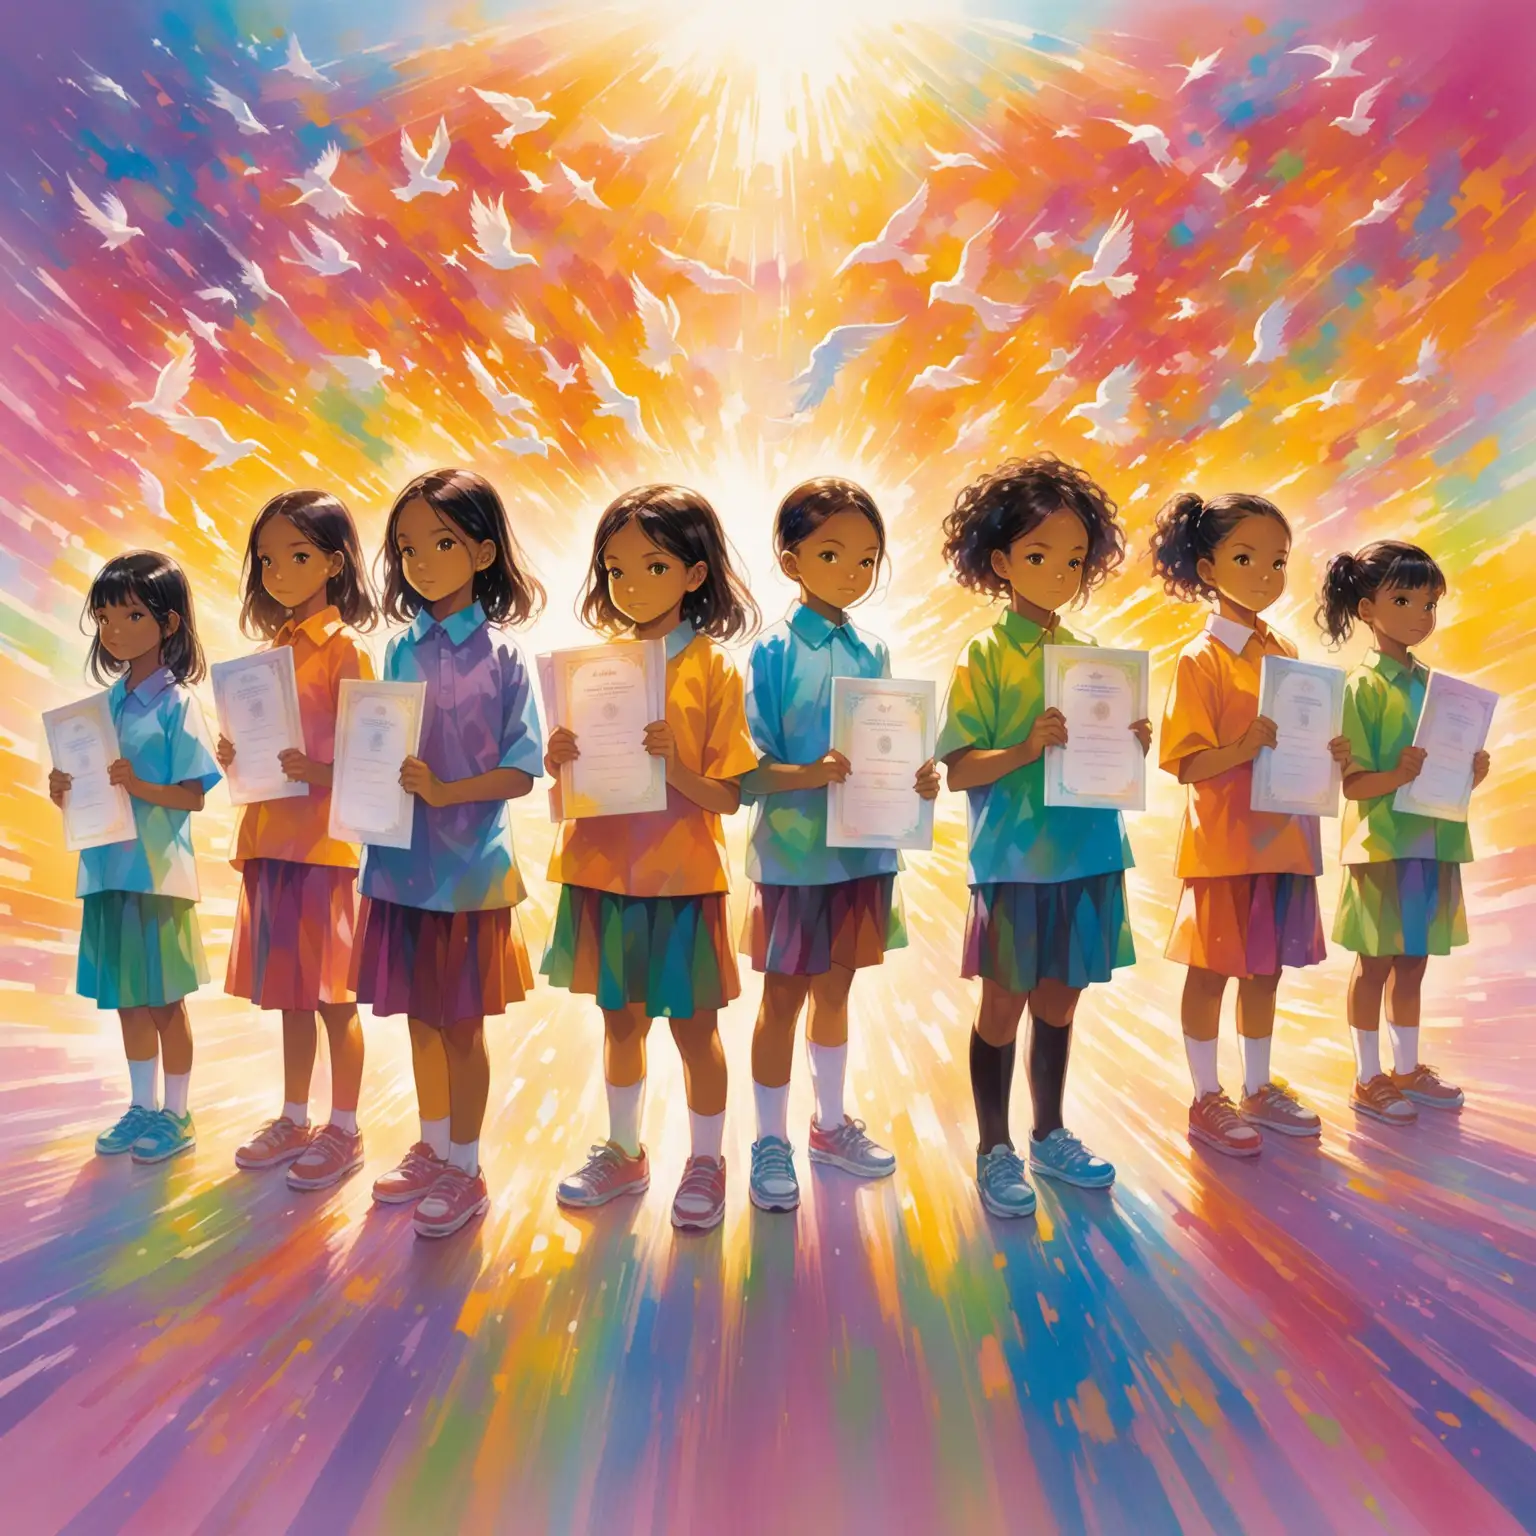 12-year-old children of mixed ethnicities holding diplomas and standing amidst dynamic brushstrokes featuring ethereal figures
mix with a David Carson Style 